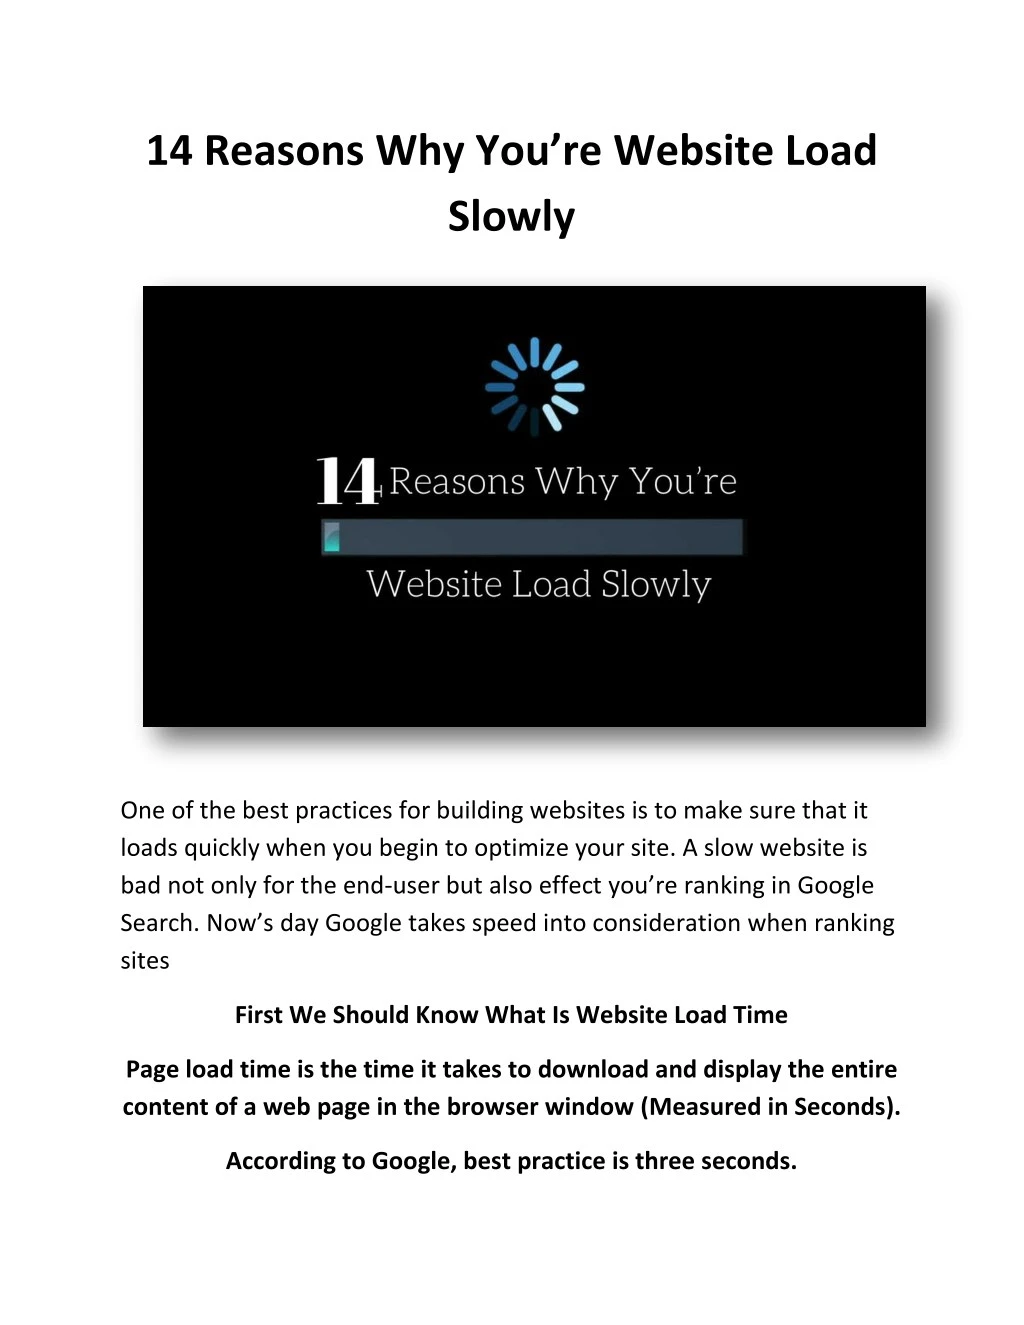 14 reasons why y ou re website load slowly